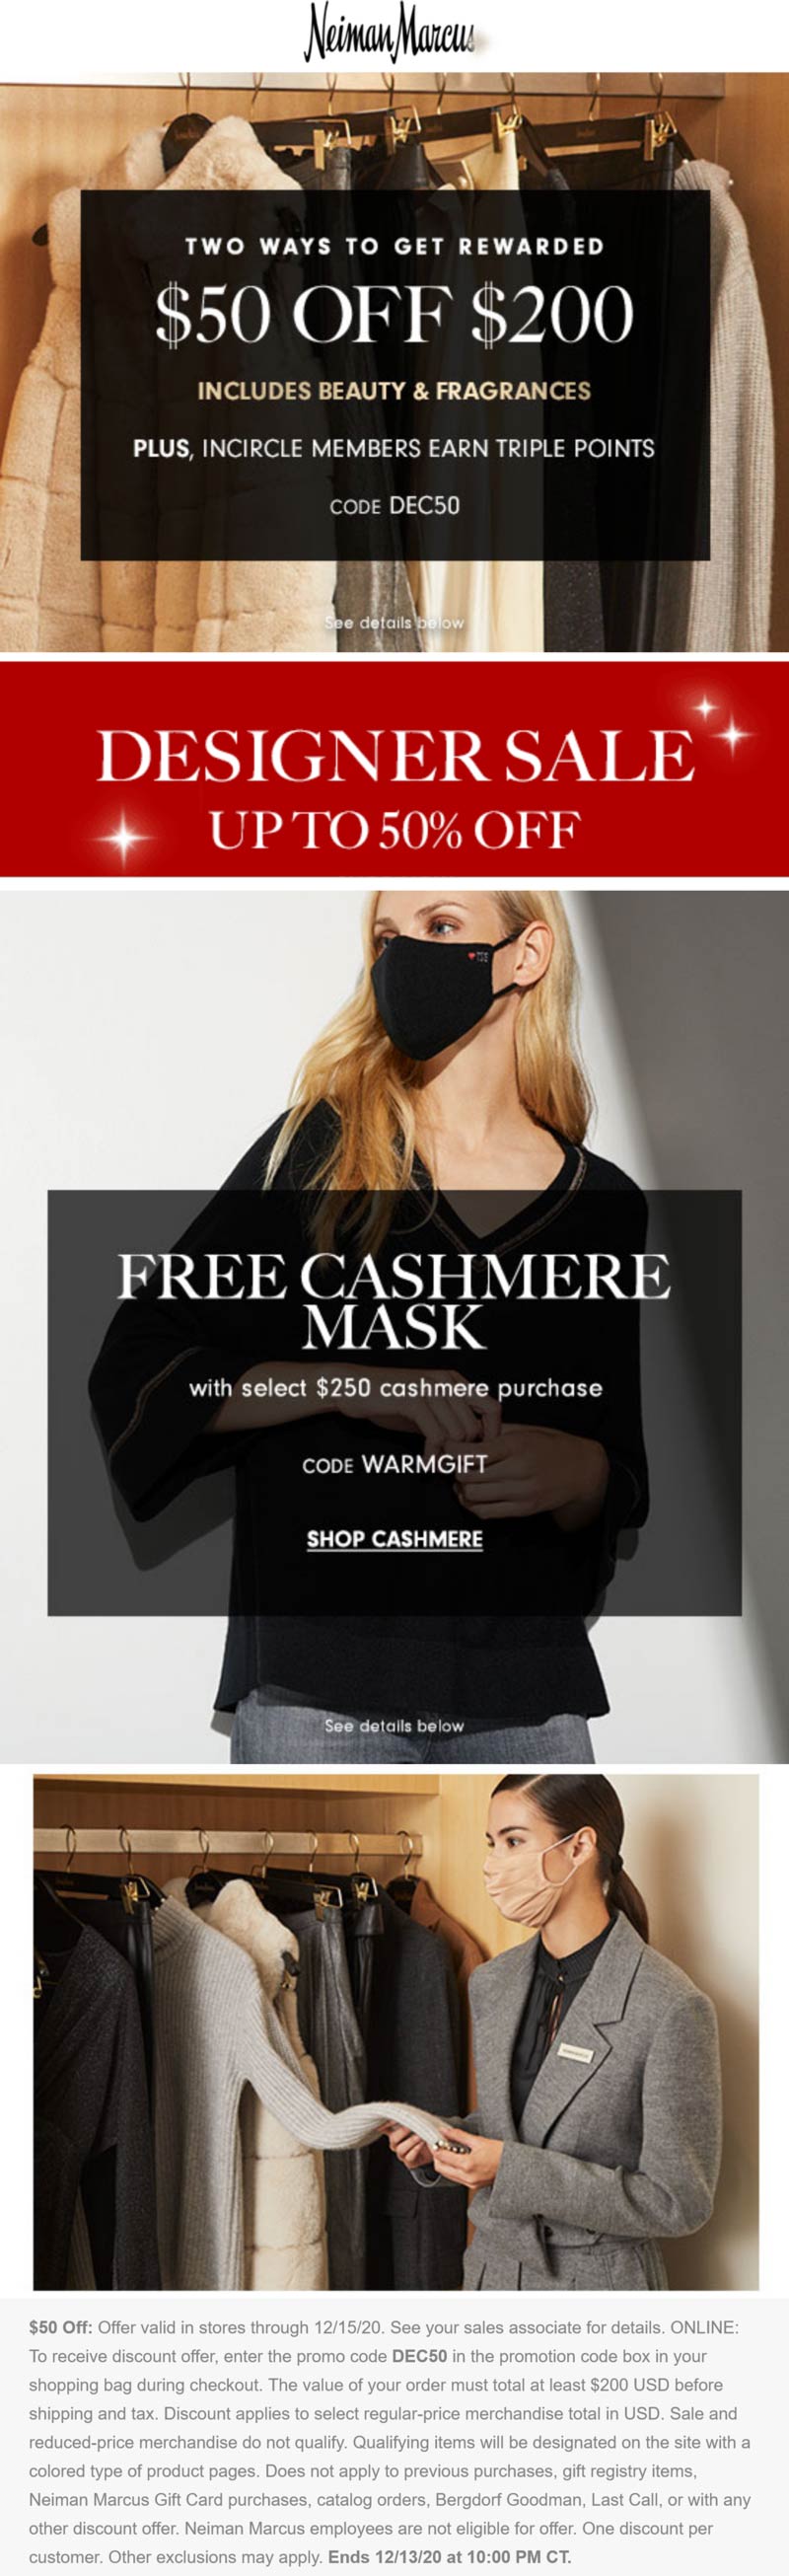 Neiman Marcus stores Coupon  $50 off $200 & free cashmere mask on $250 at Neiman Marcus via promo code DEC50 and WARMGIFT #neimanmarcus 